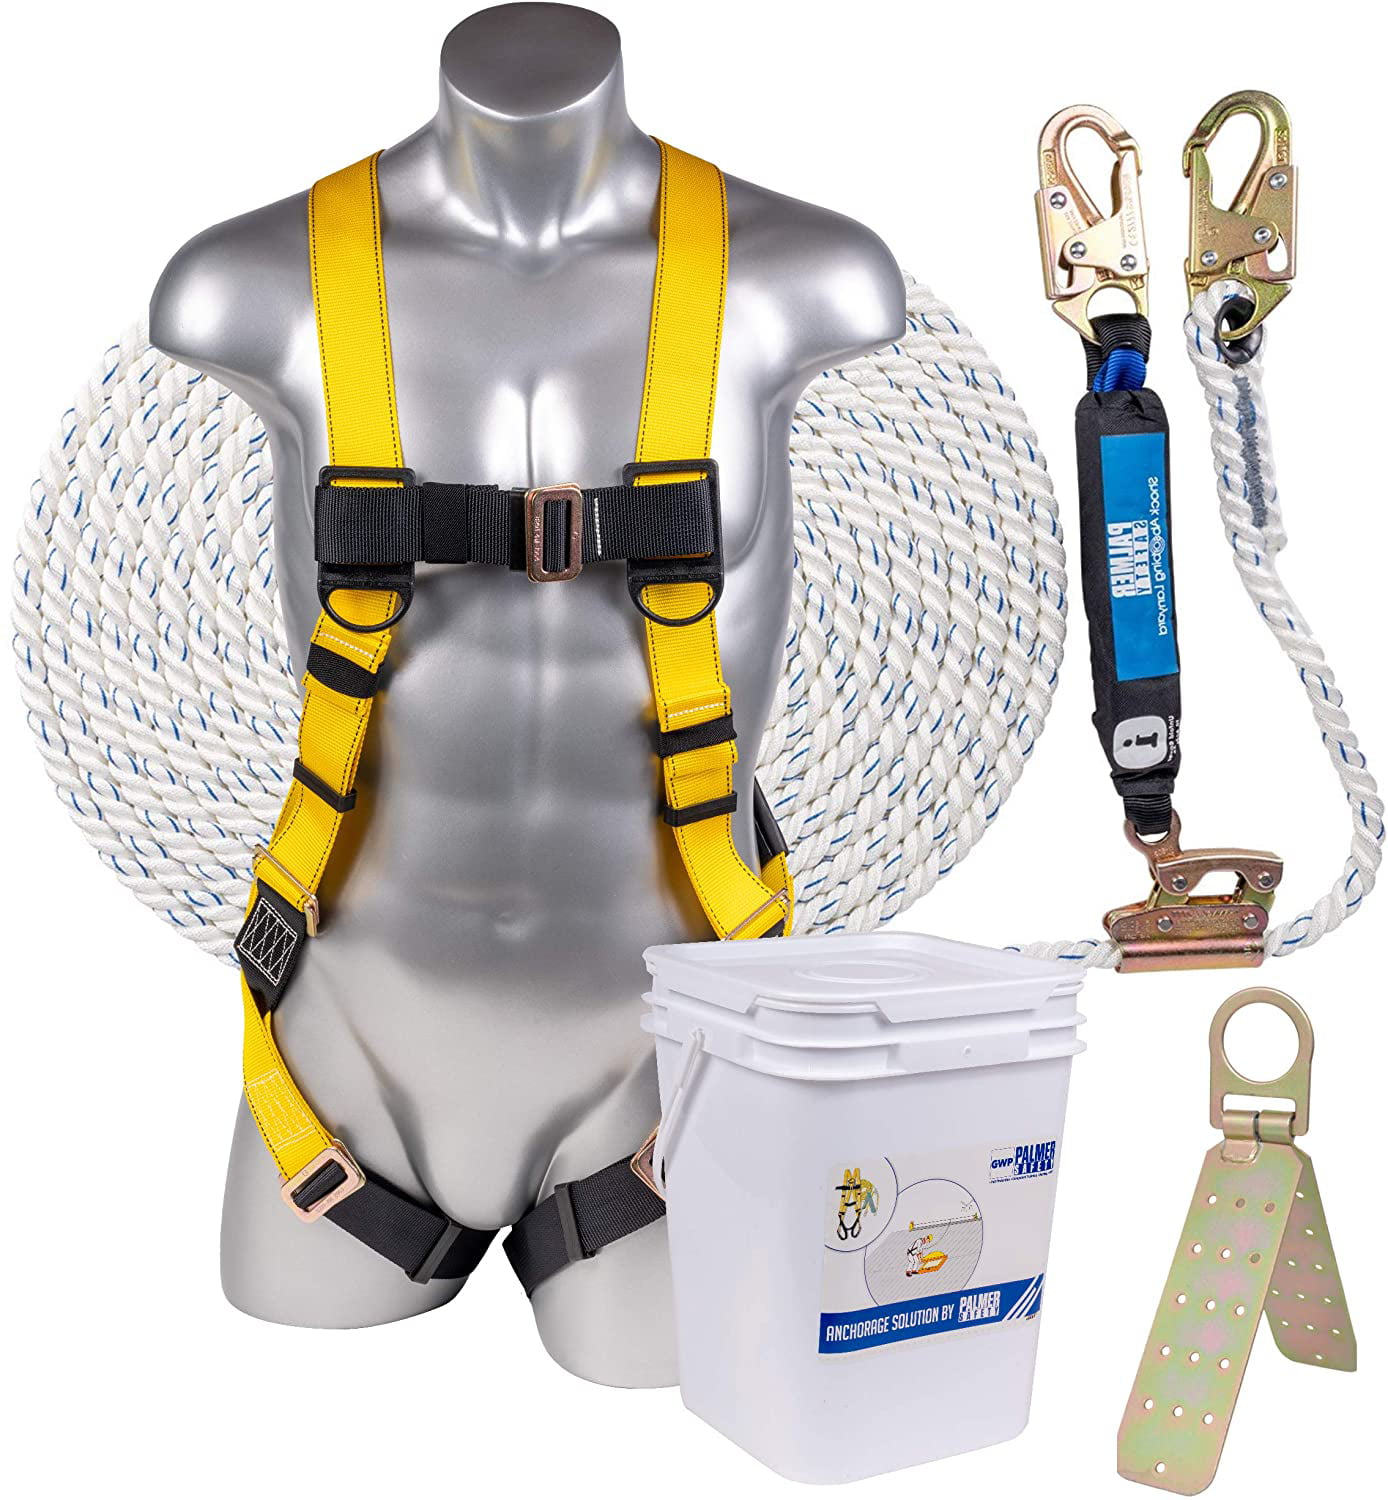 Muddy Magnum Elite One Size Fits Most Harness USA Ships Free 